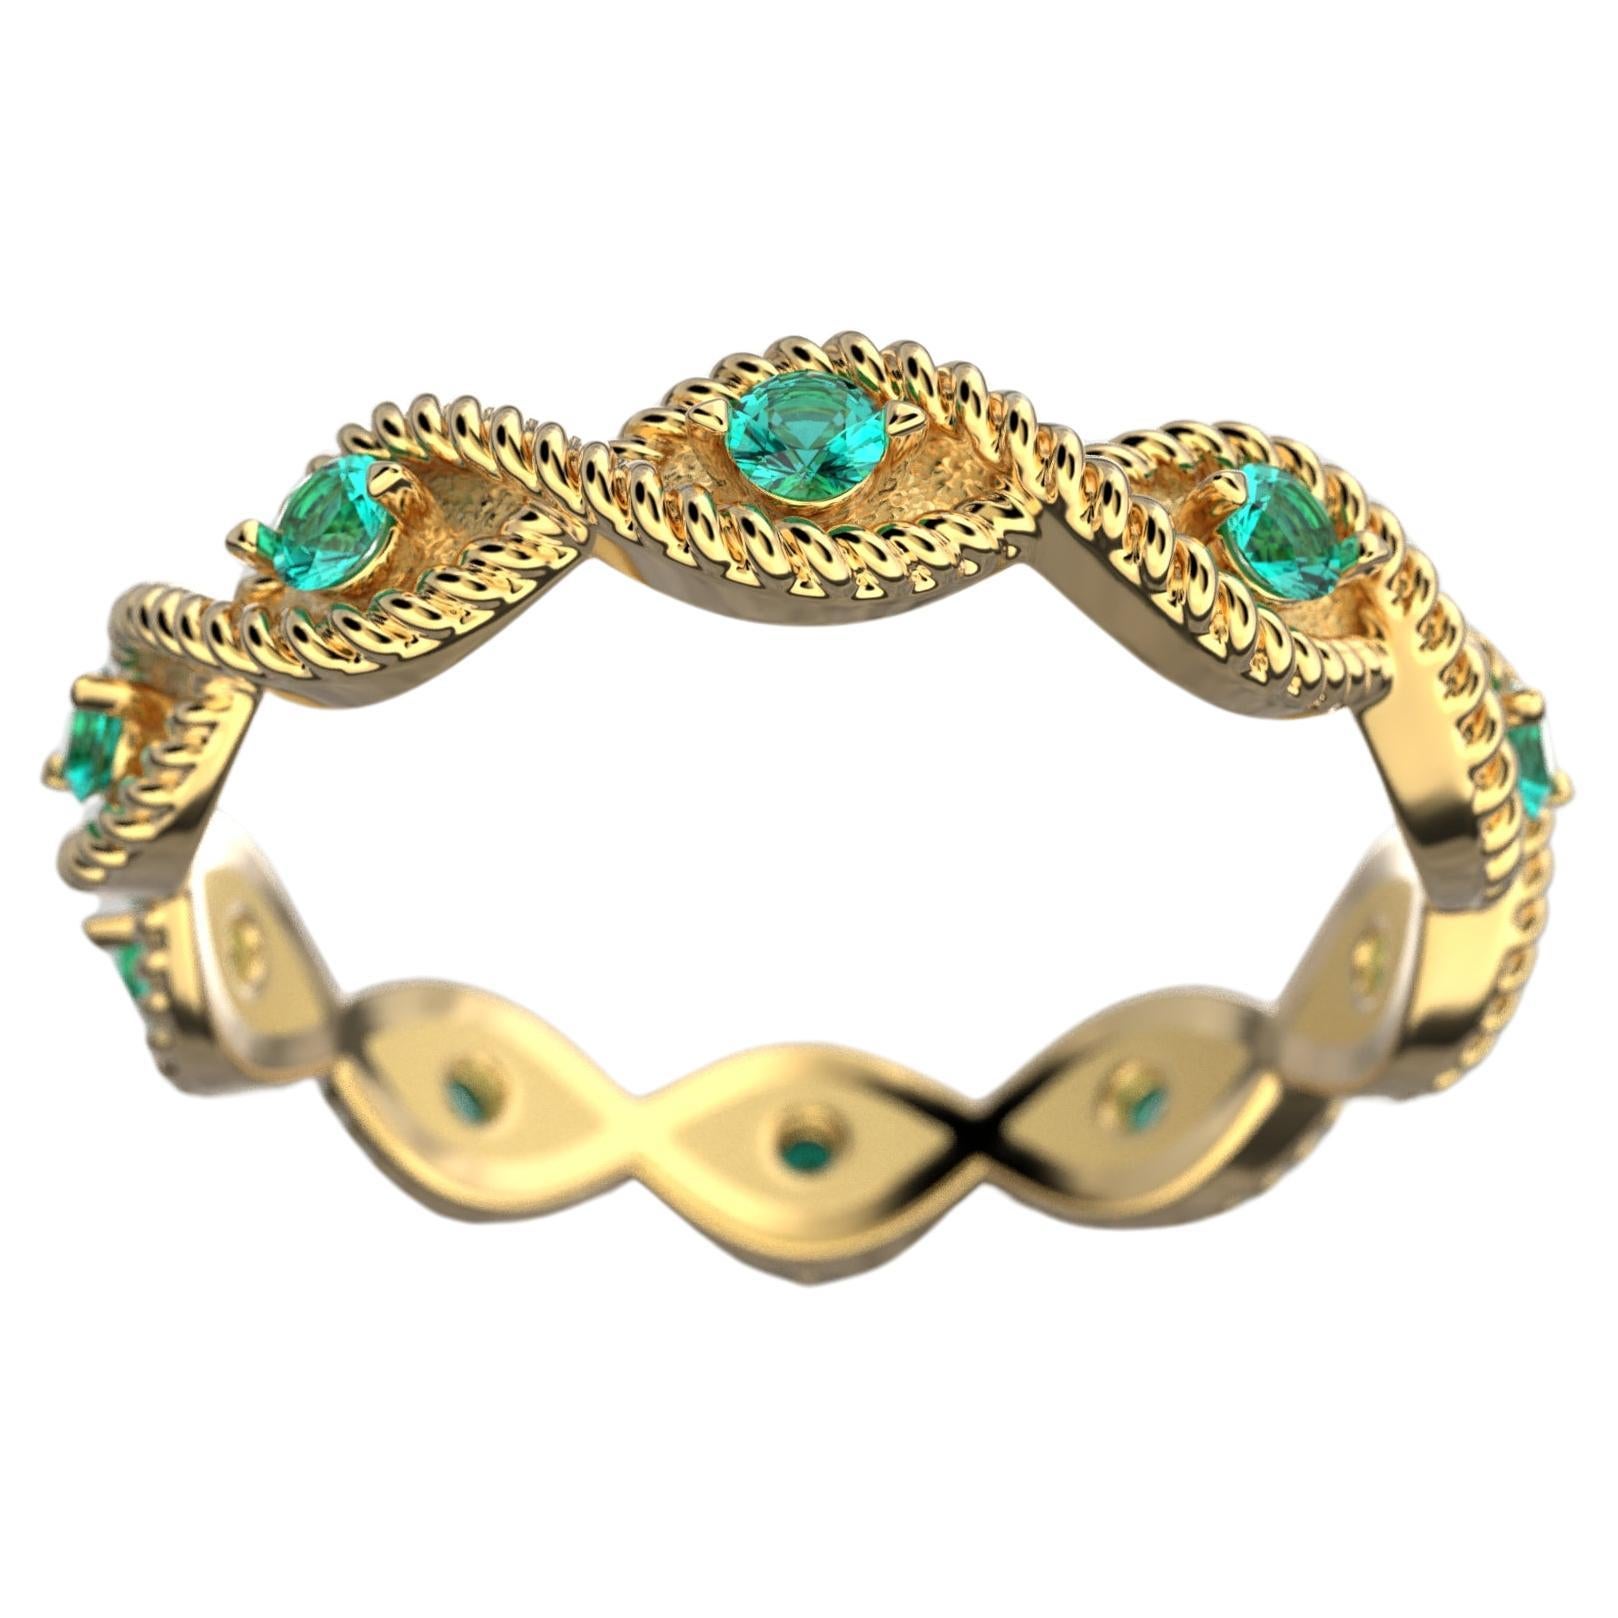 For Sale:  18k Solid Gold Emerald Ring Made in Italy, Eternity Emerald Gold Band